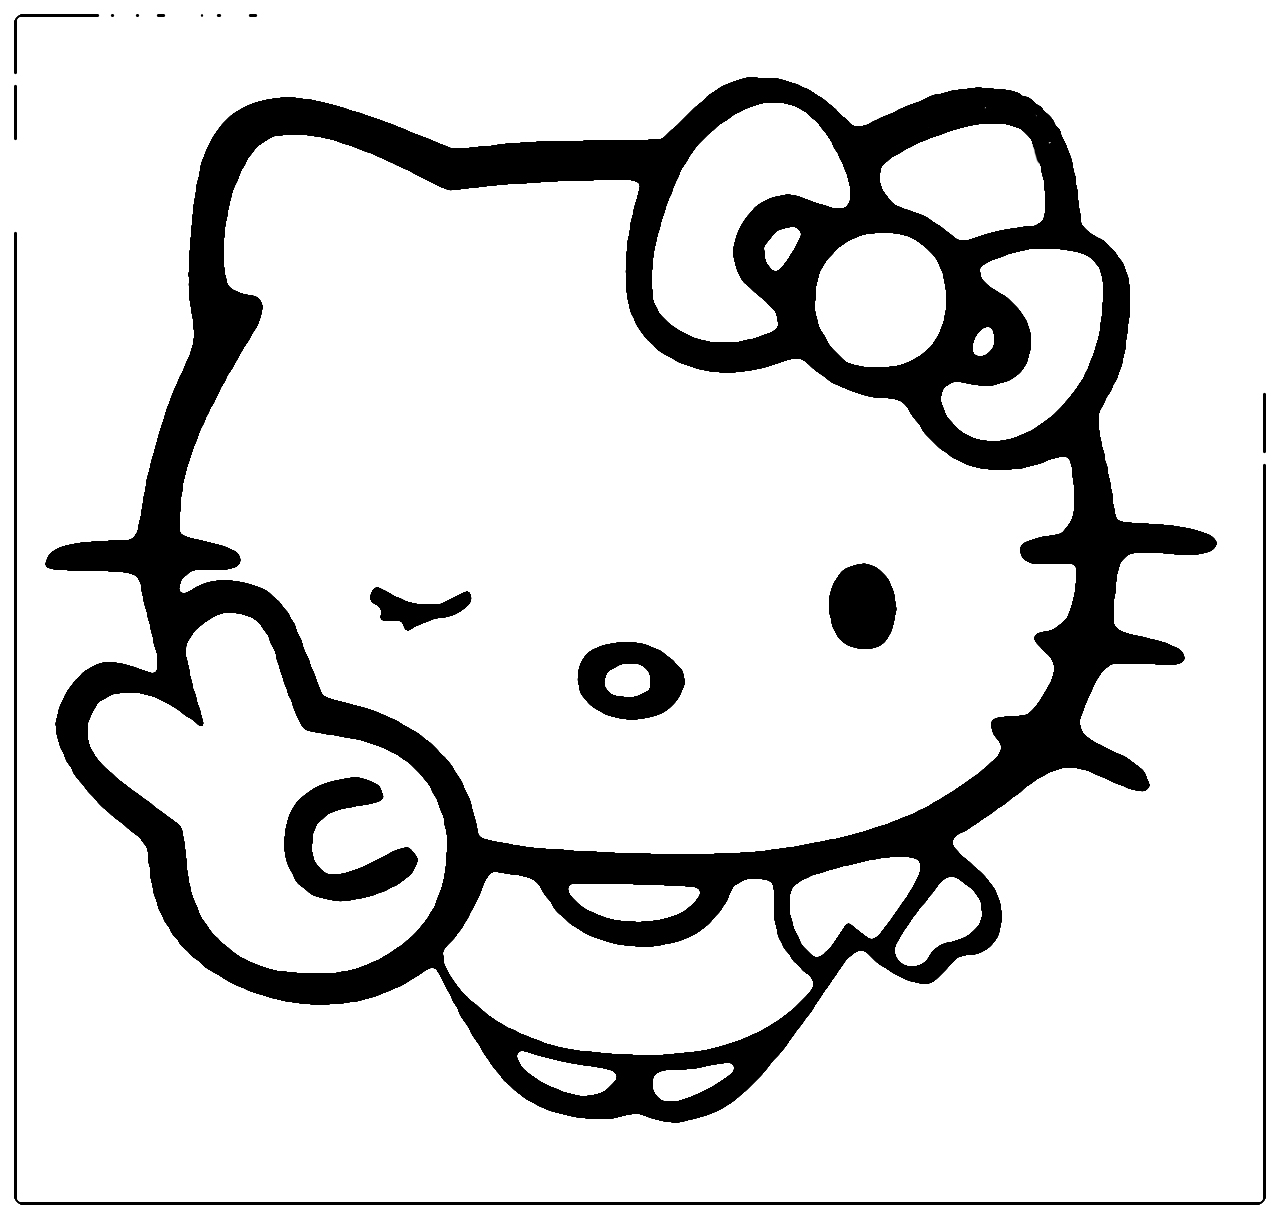  Hello  Kitty  stickers  for sale stickerbombranger